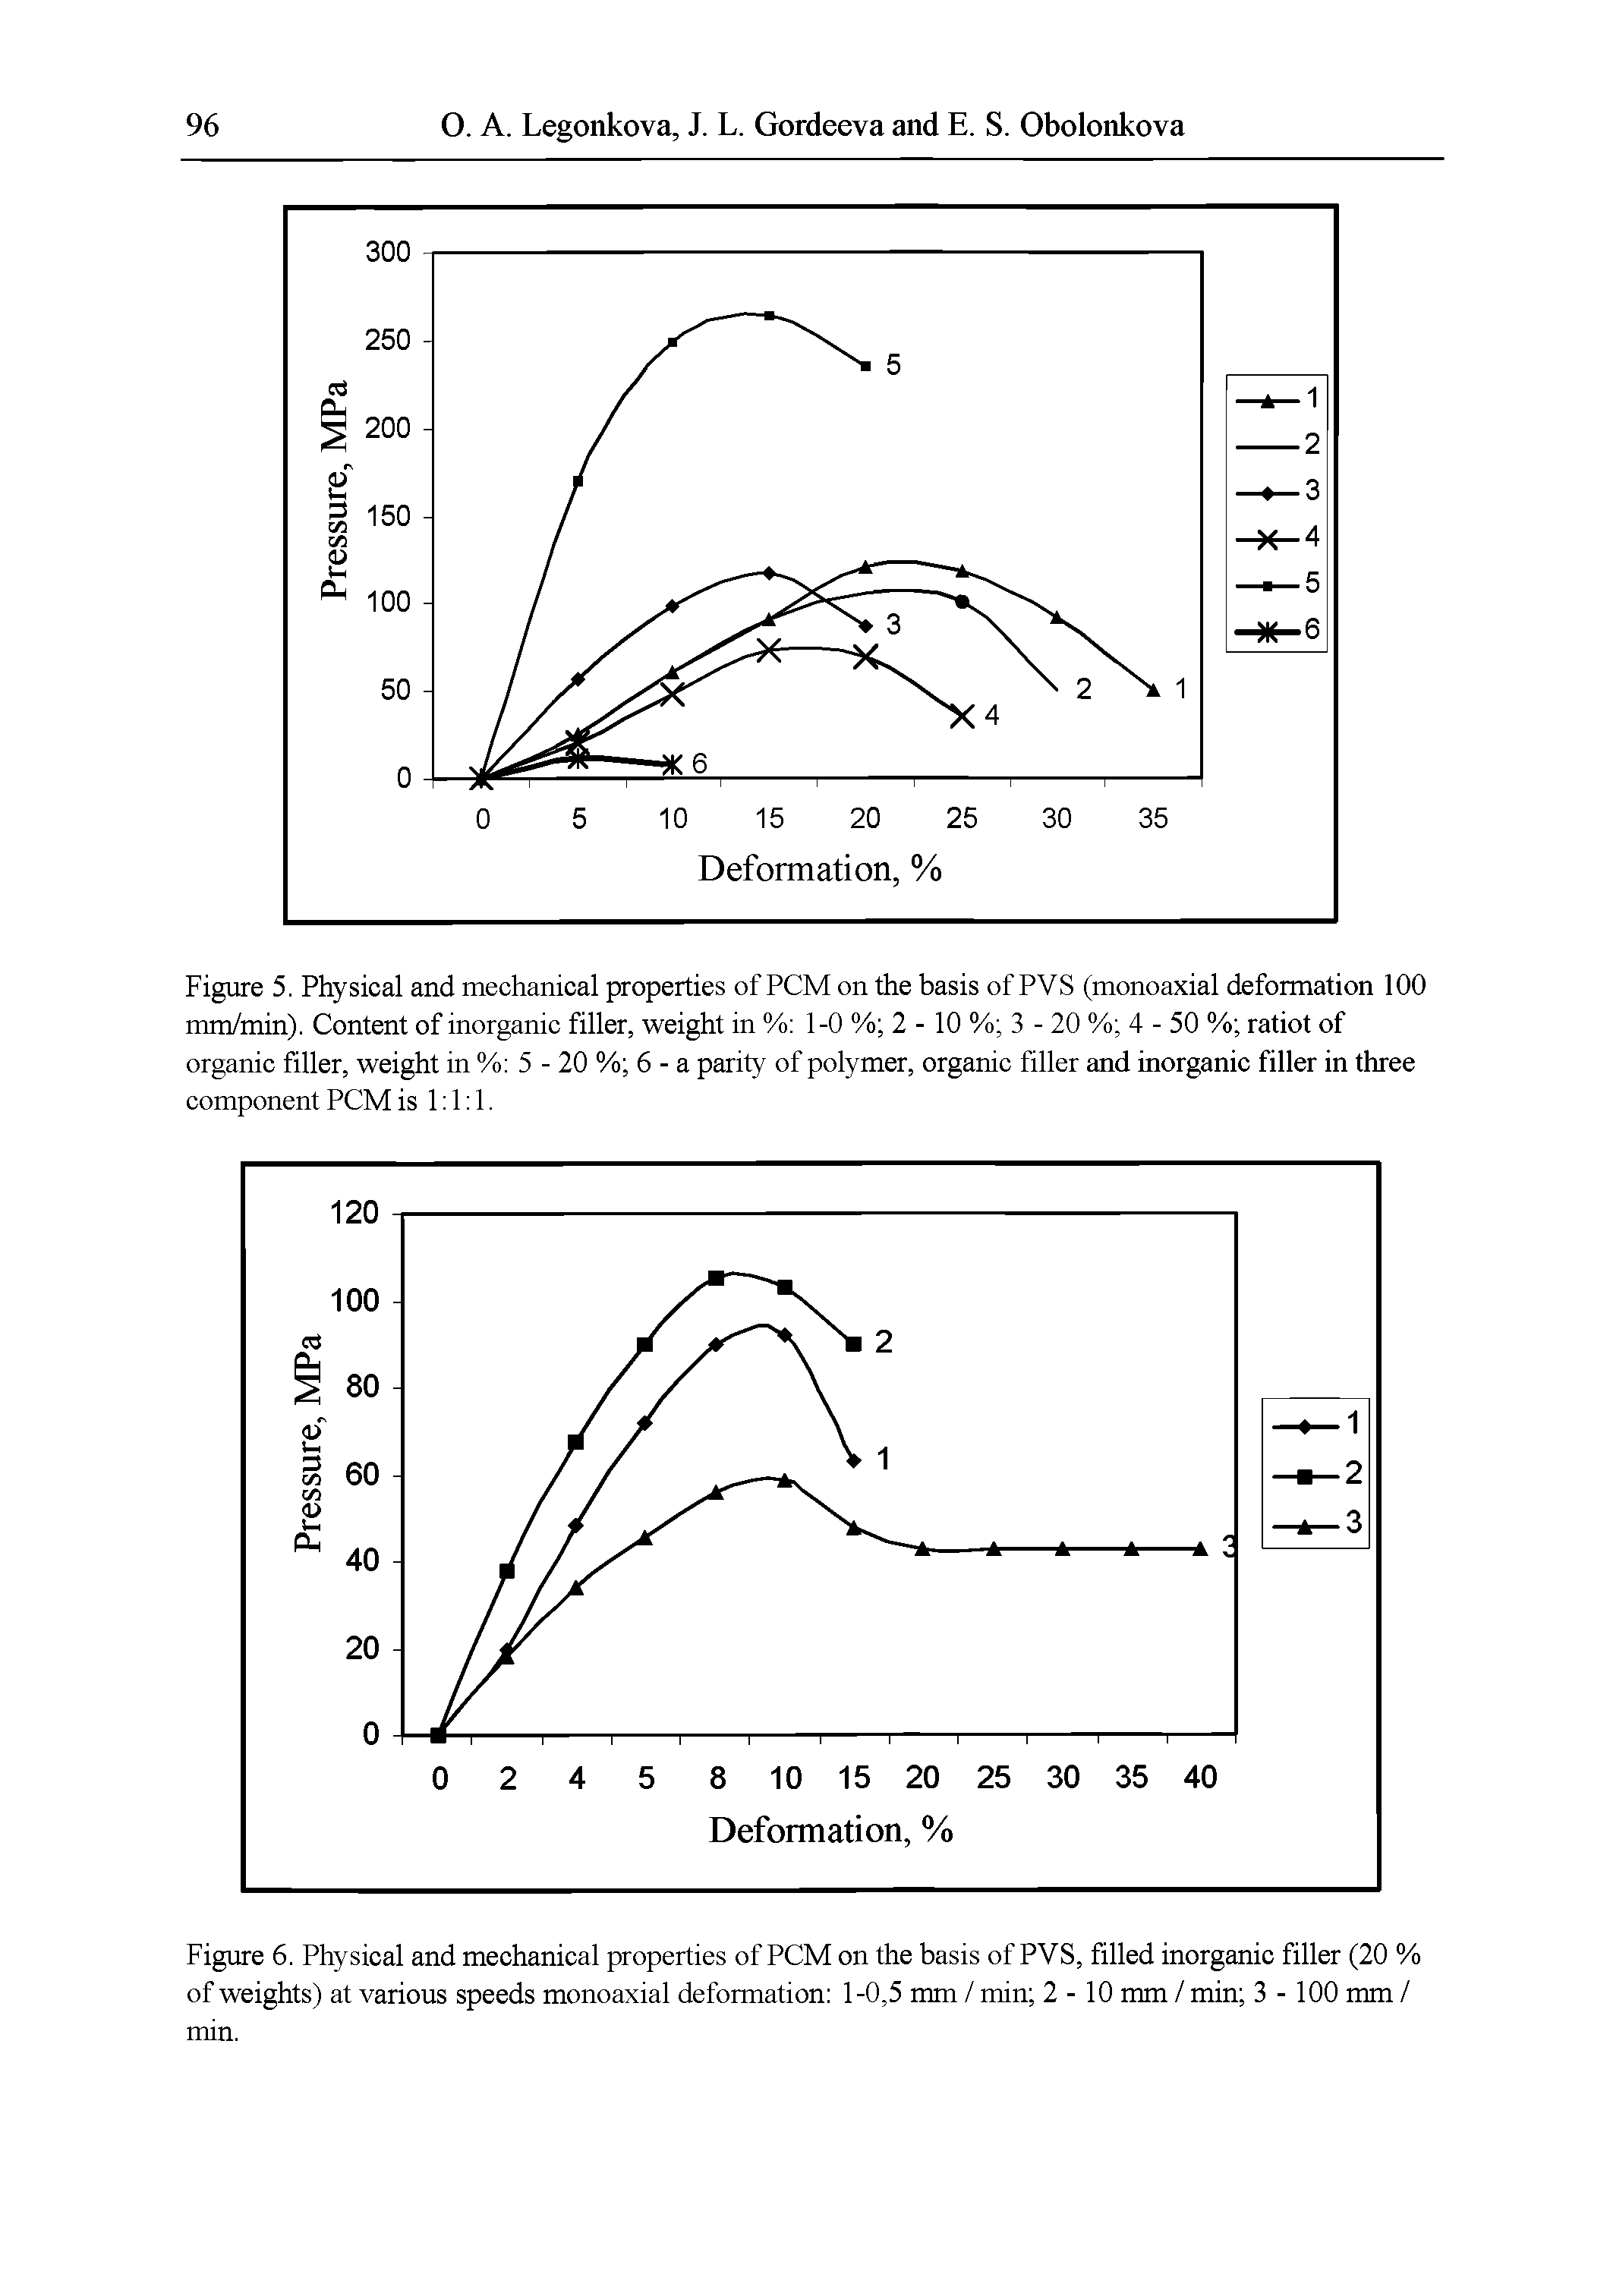 Figure 5. Physical and mechanical properties of PCM on the basis of PVS (monoaxial deformation 100 mm/min). Content of inorganic filler, weight in % 1-0 % 2-10 % 3-20 % 4-50 % ratiot of organic filler, weight in % 5-20 % 6 - a parity of polymer, organic filler and inorganic filler in three component PCM is 1 1 1.